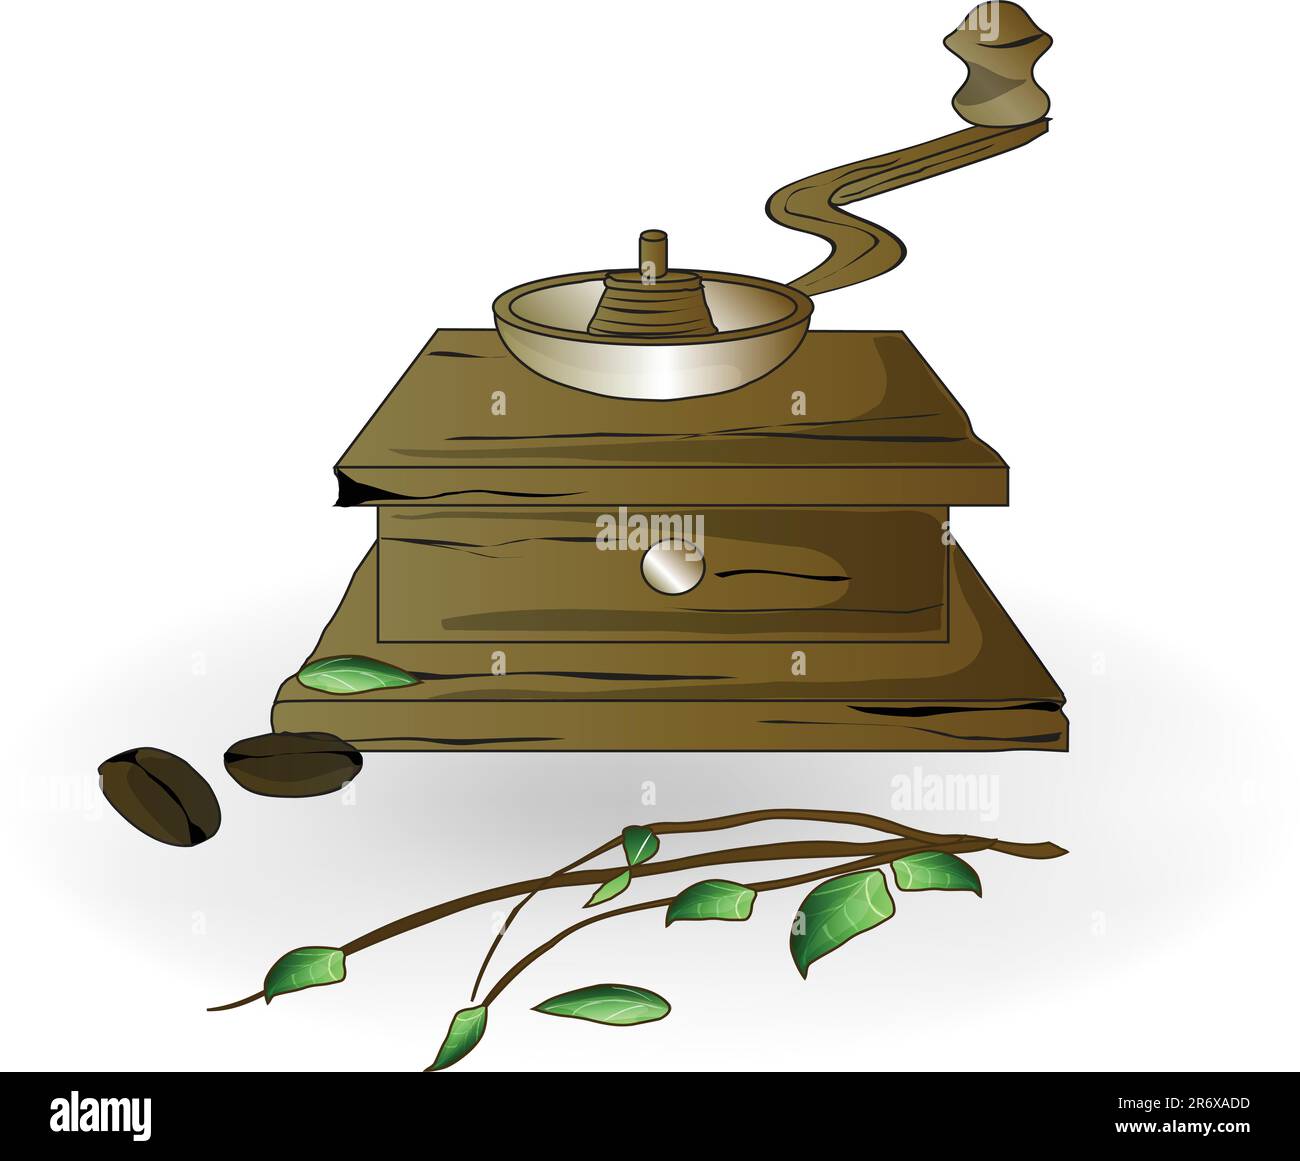 antique coffee grinder for grinding coffee beans flavored Stock Vector